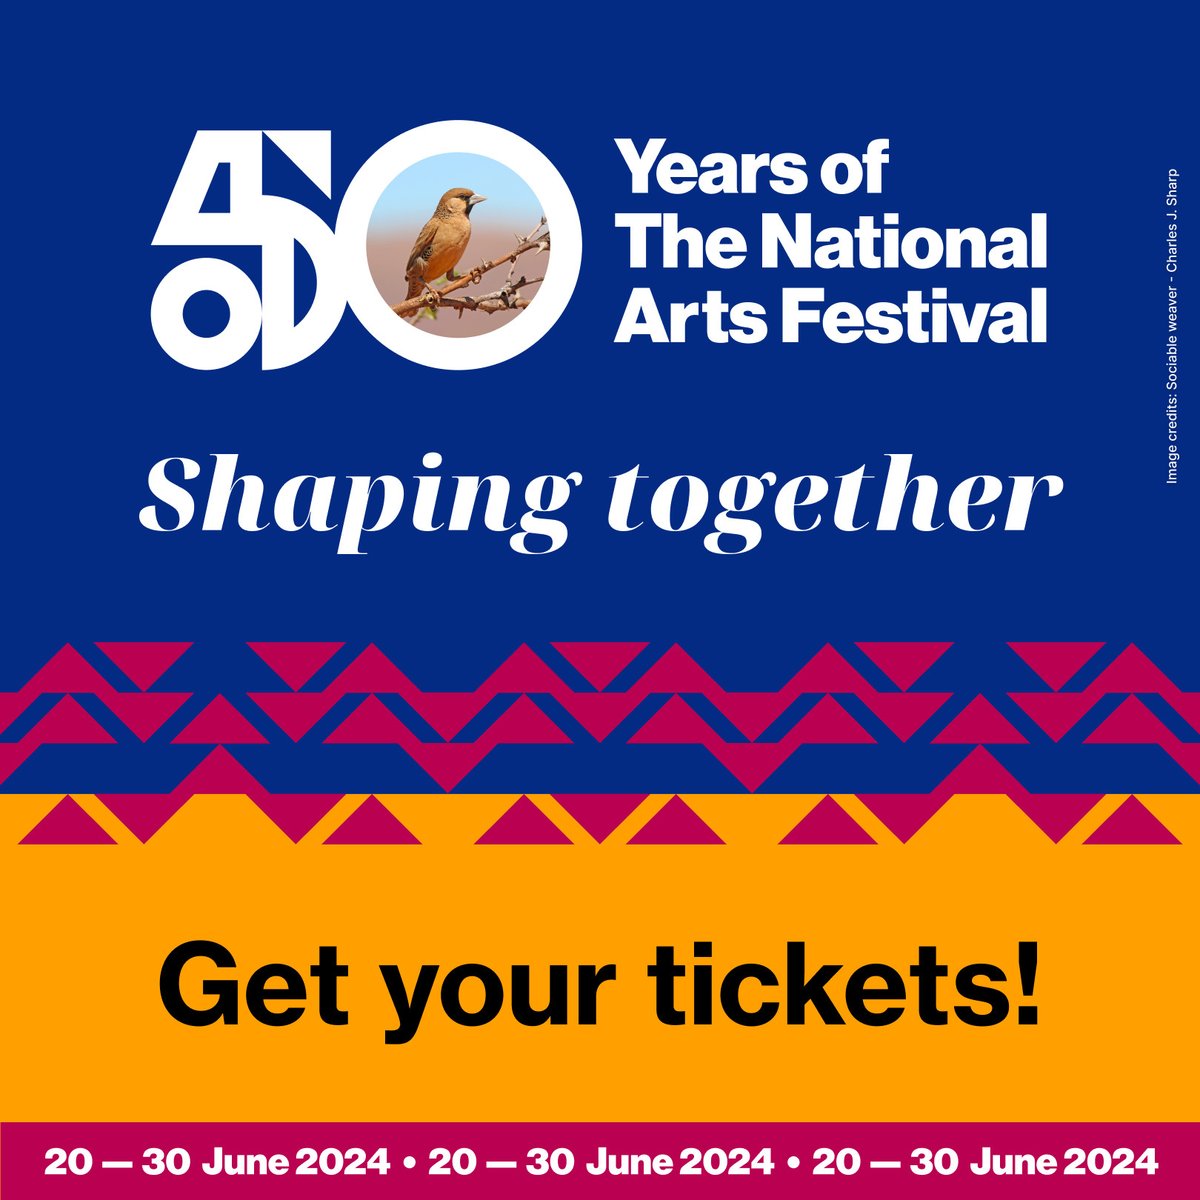 Have you started booking your tickets for #NAF2024? We're just 50 days away from the wonderful works and exceptional experiences presented in the 50th celebration edition of the Festival, from 20 – 30 June.Visit bit.ly/3JJJJLP to see more. #NAF50 #ShapingTogether